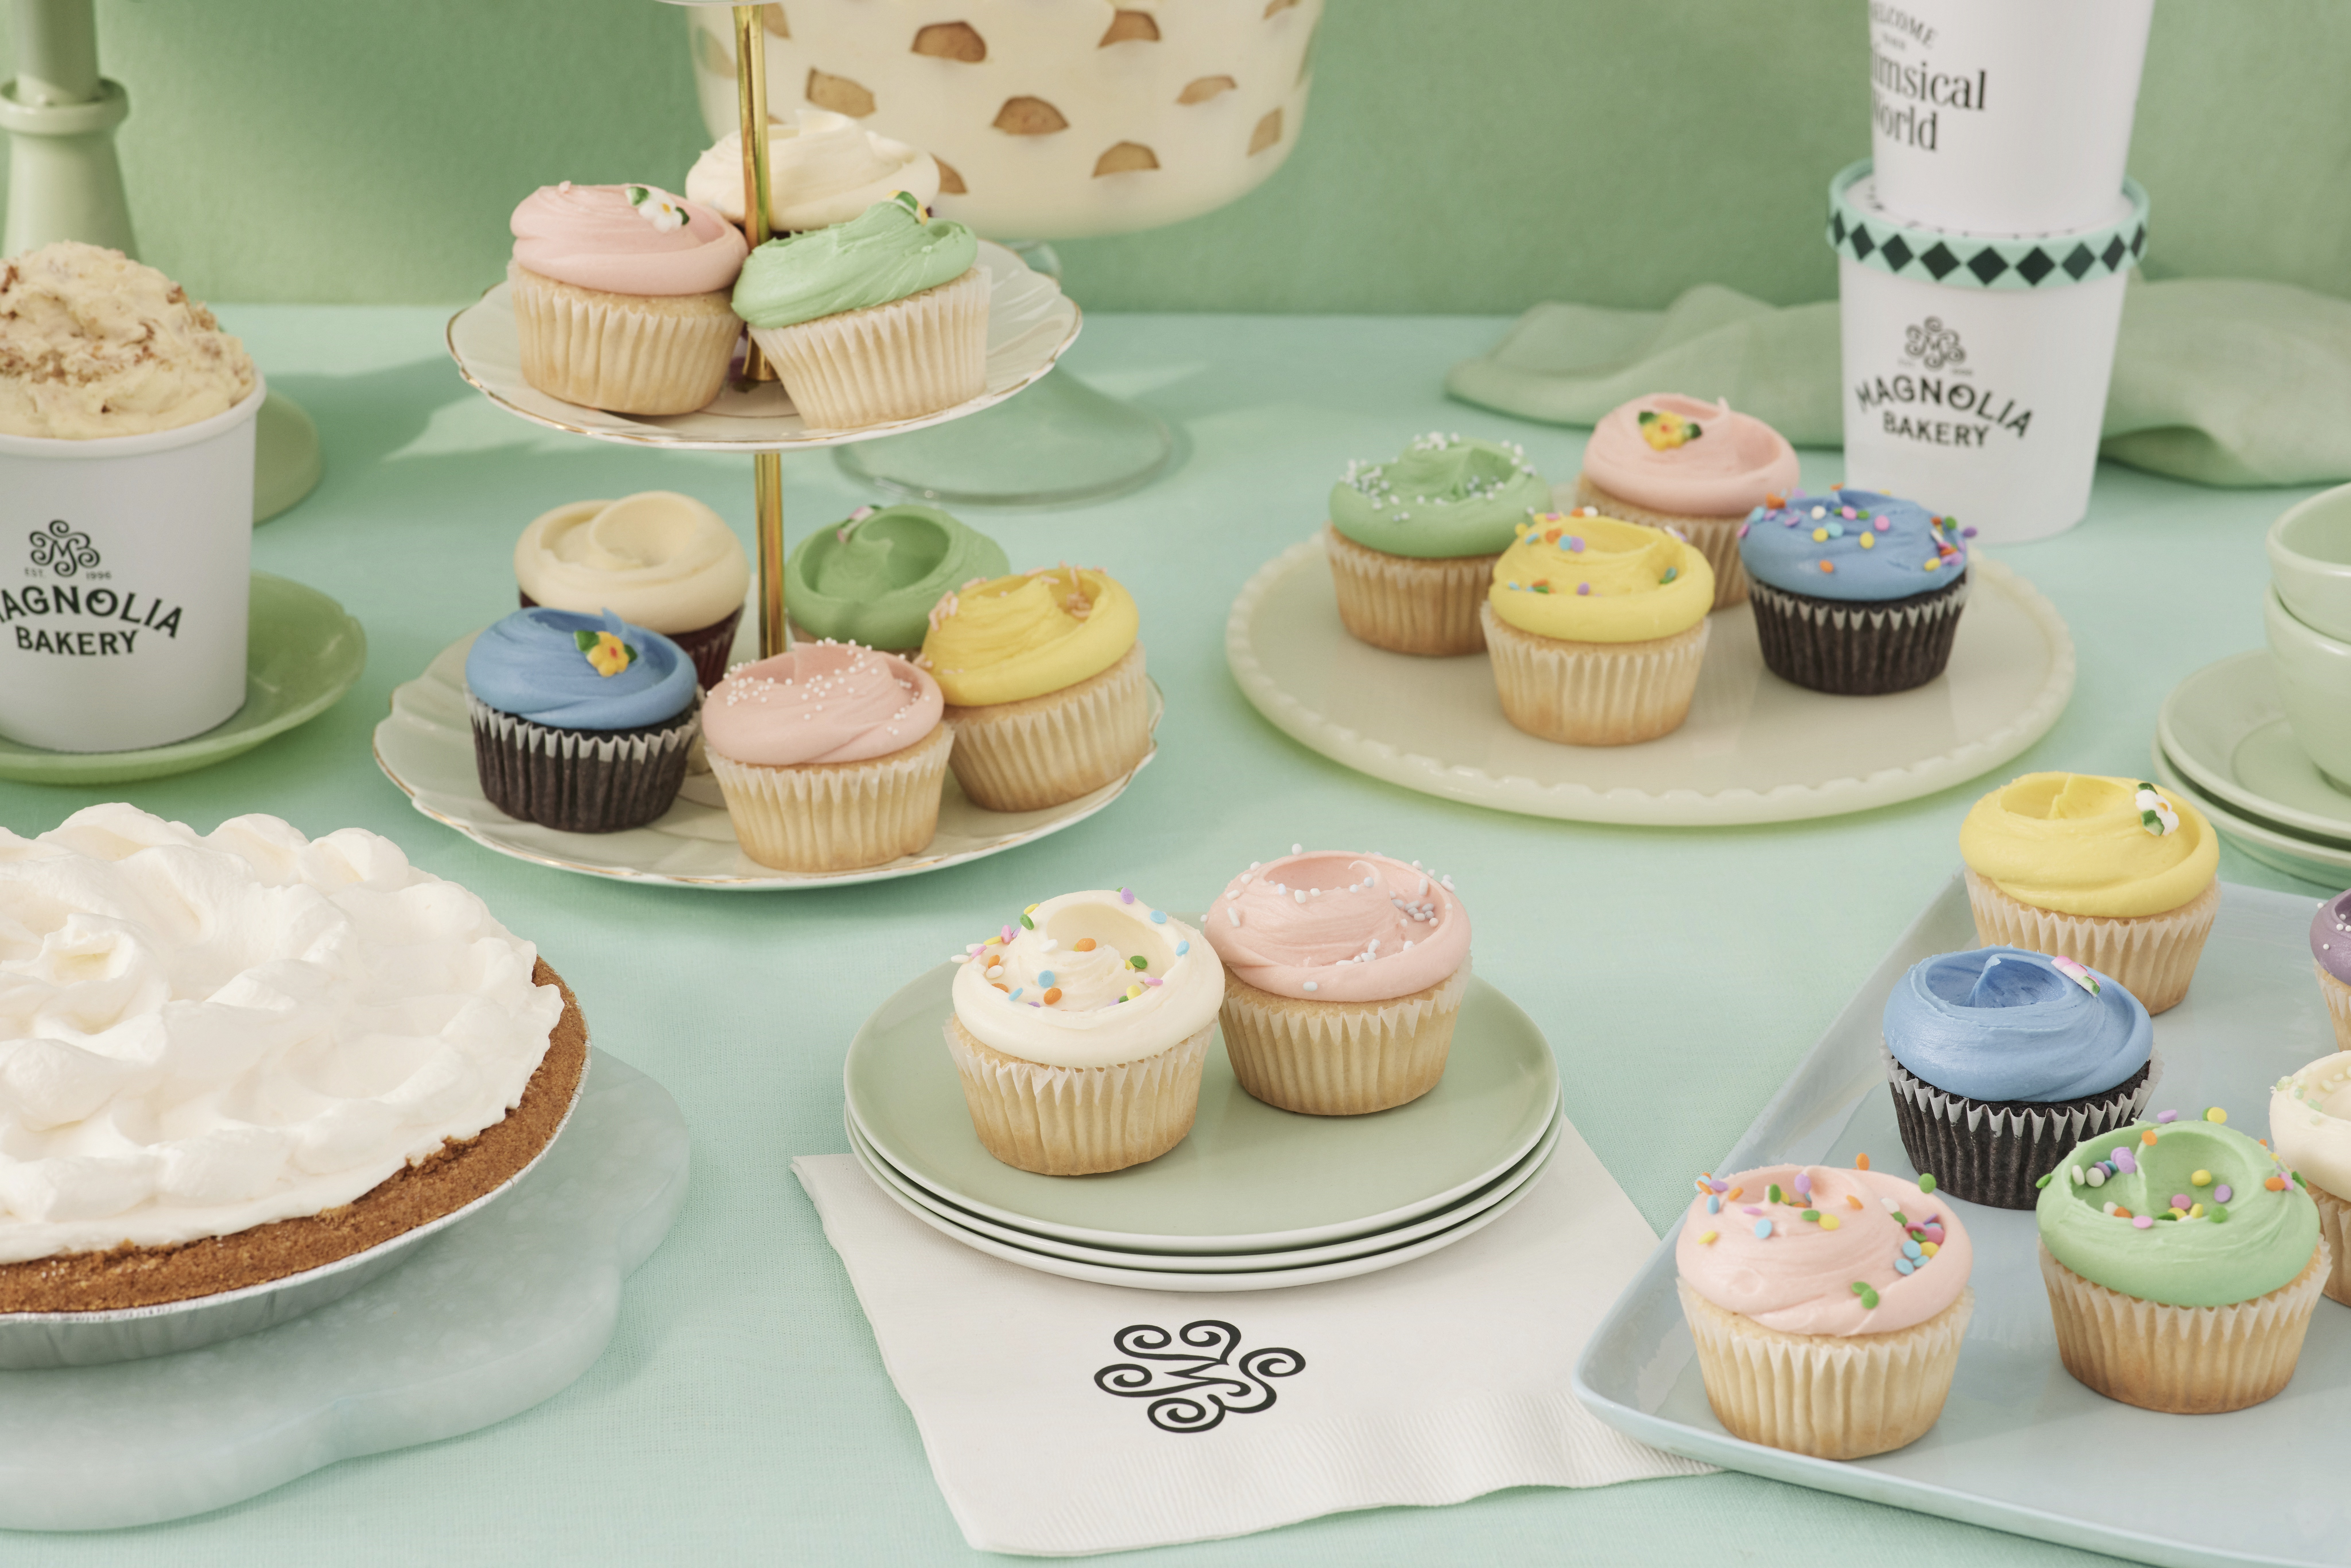 Spread of cupcakes on tray